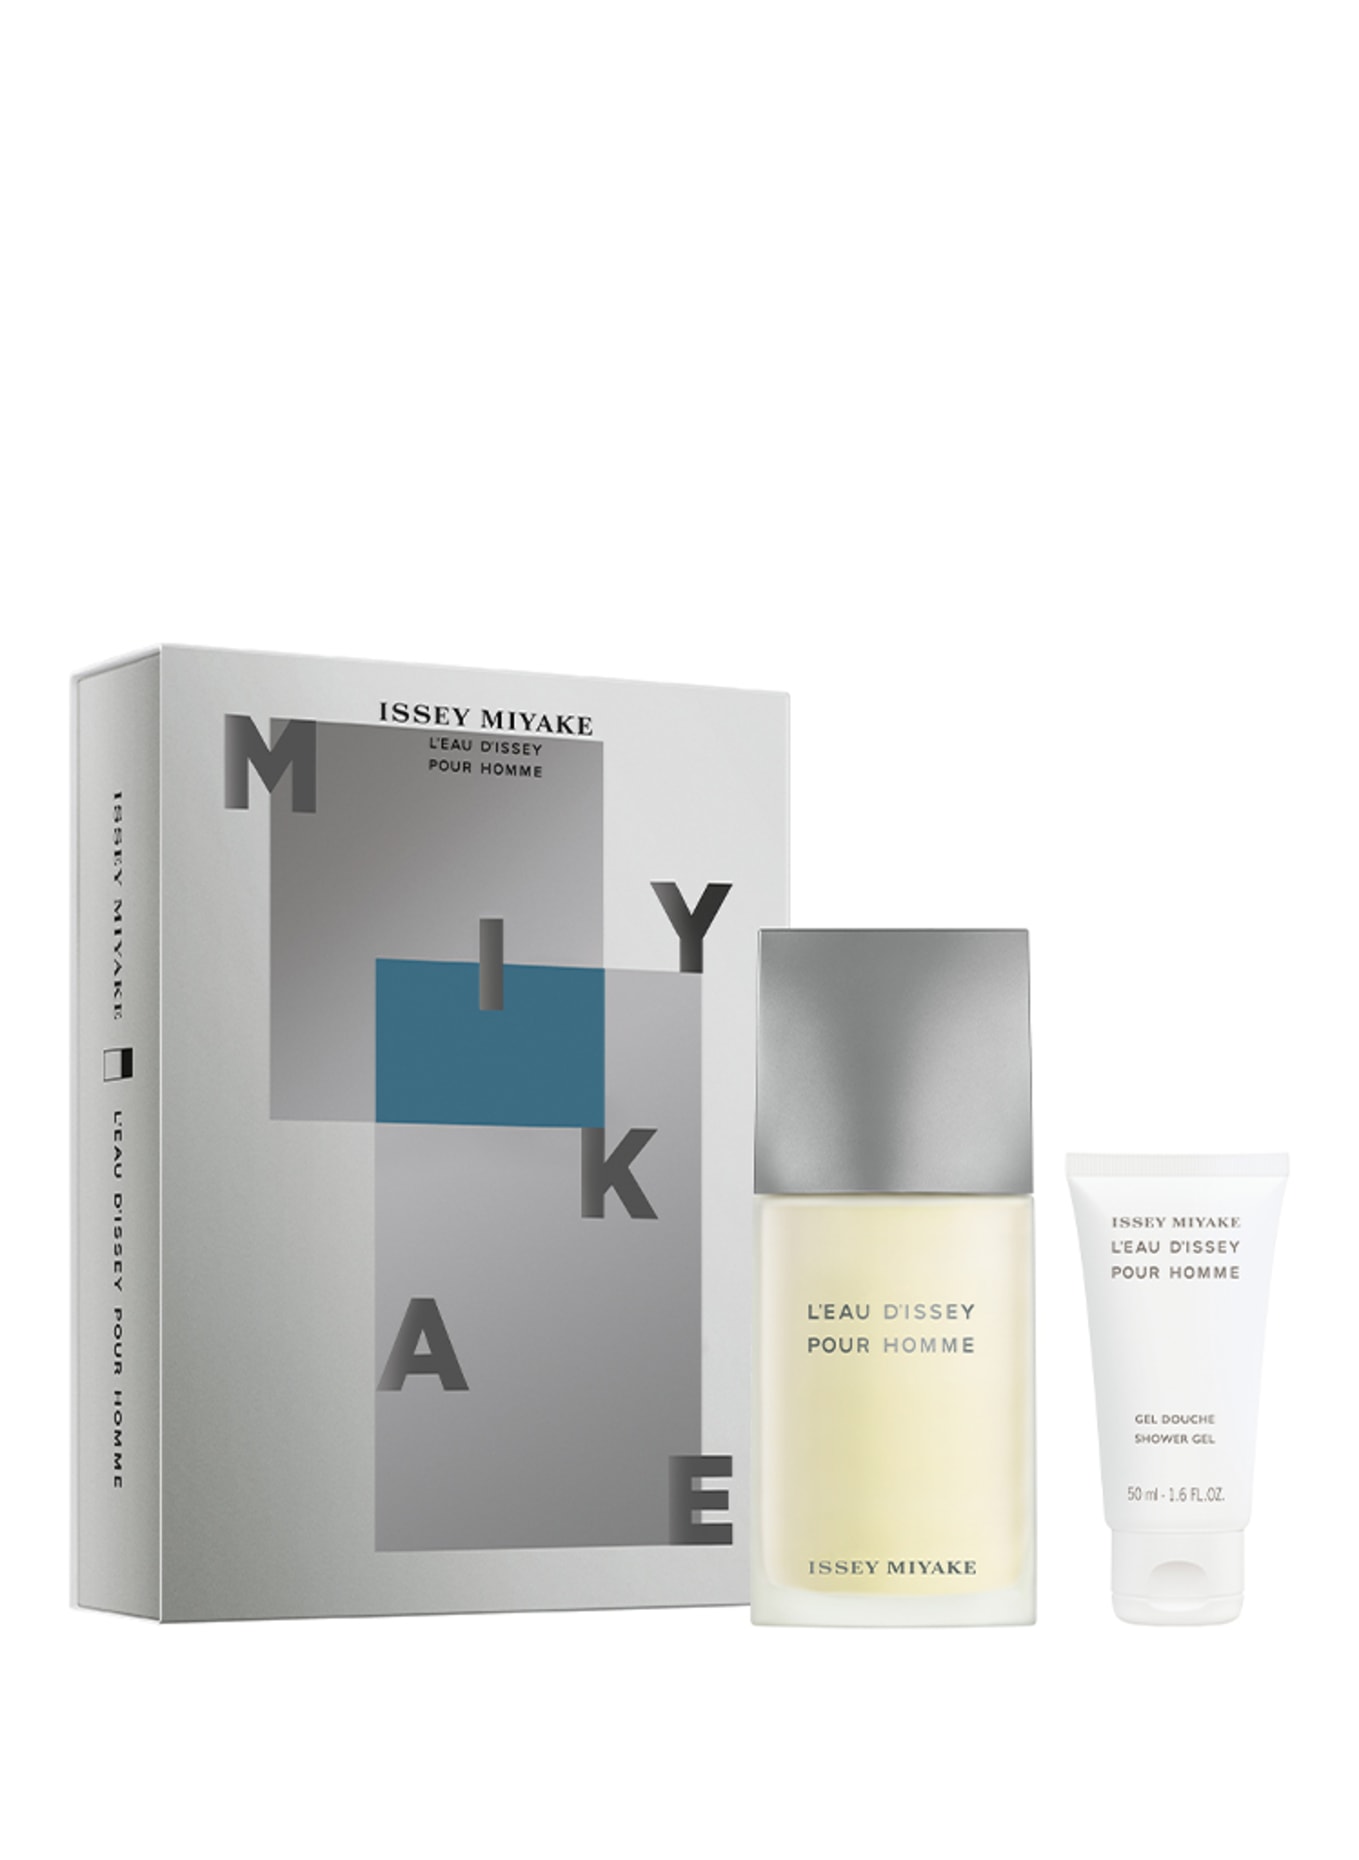 ISSEY MIYAKE L'EAU D'ISSEY POUR HOMME (Obrazek 1)